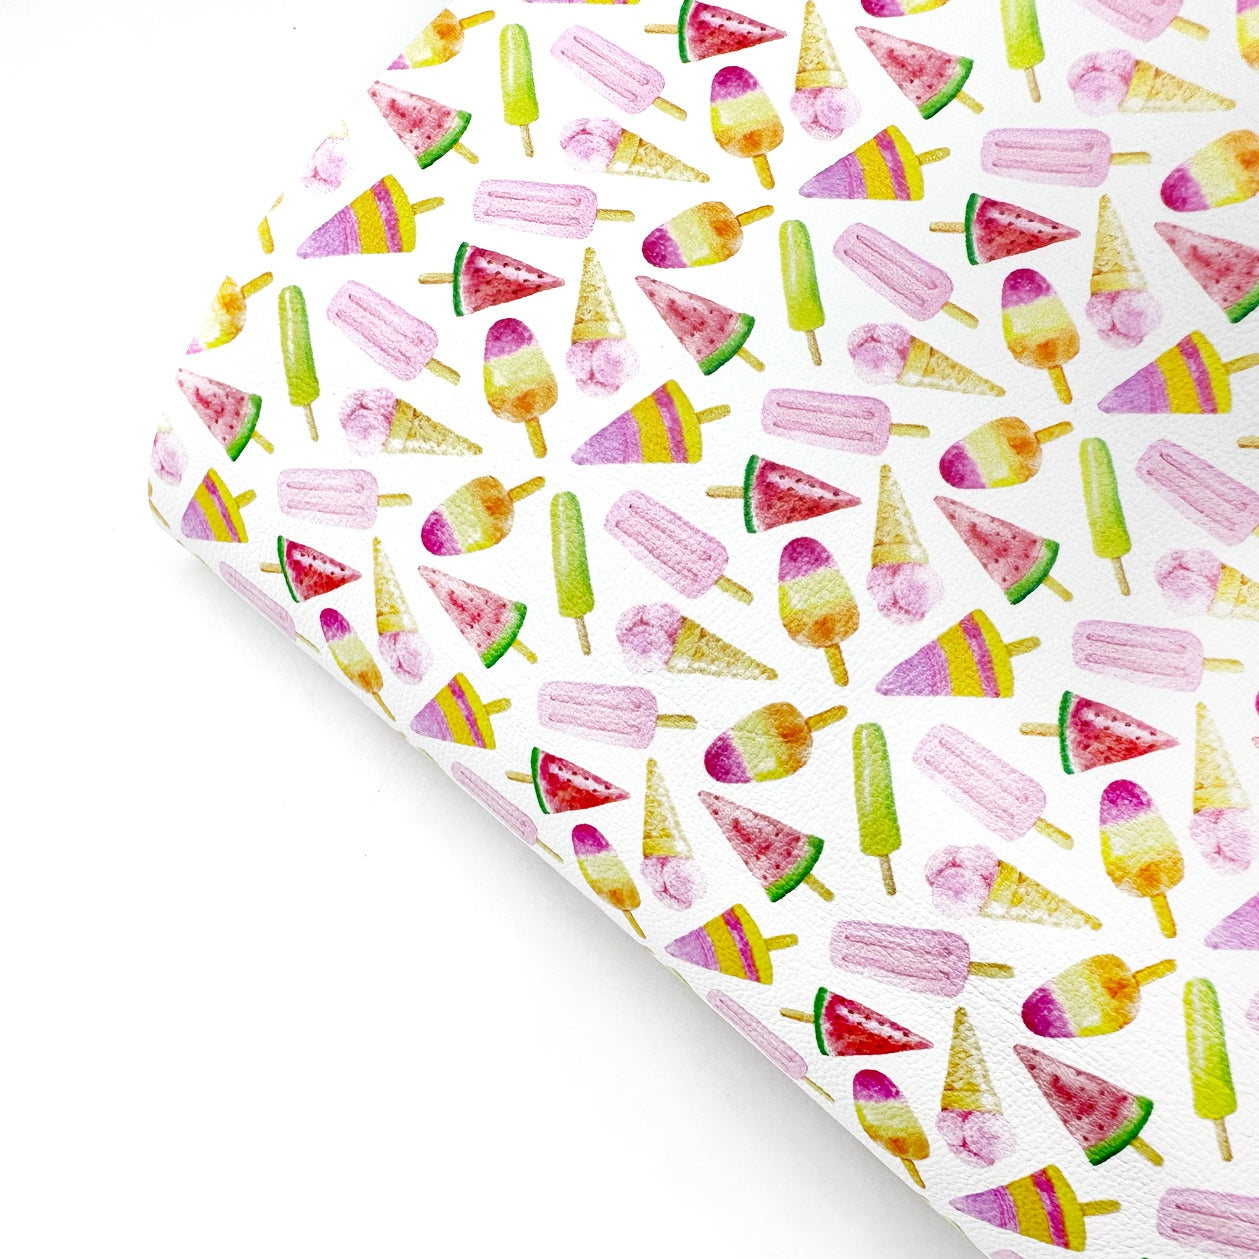 Fruity Lolly Ice Premium Faux Leather Fabric Sheets